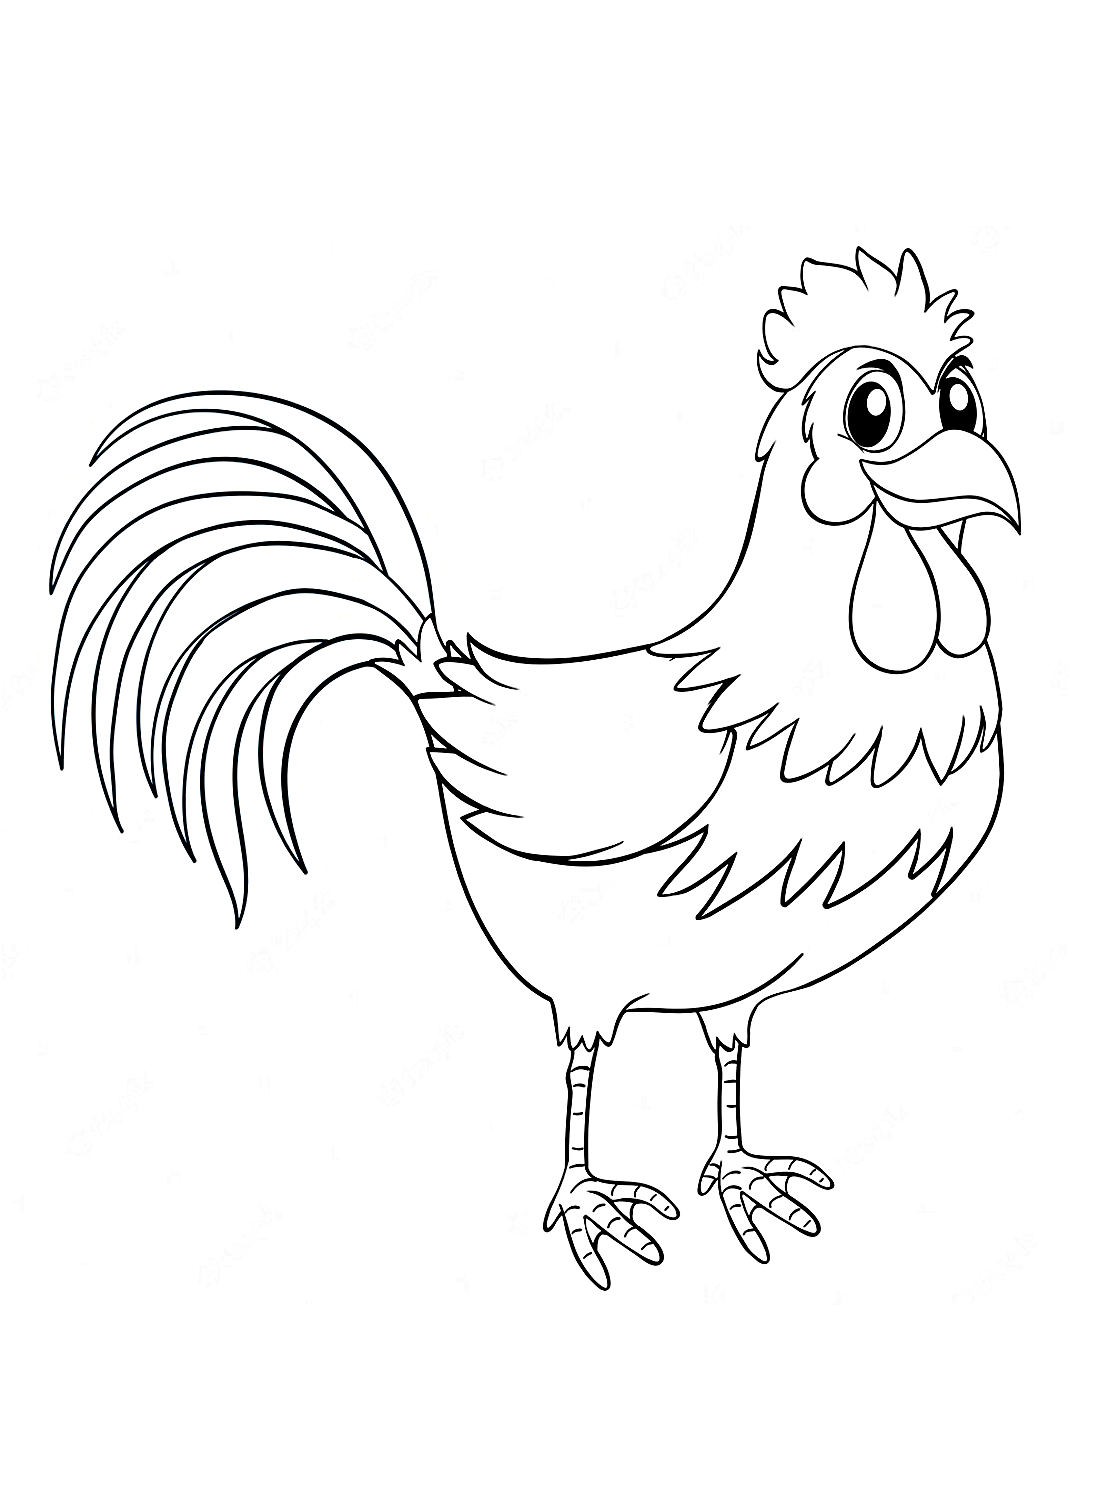 The intellegent rooster Coloring Pages